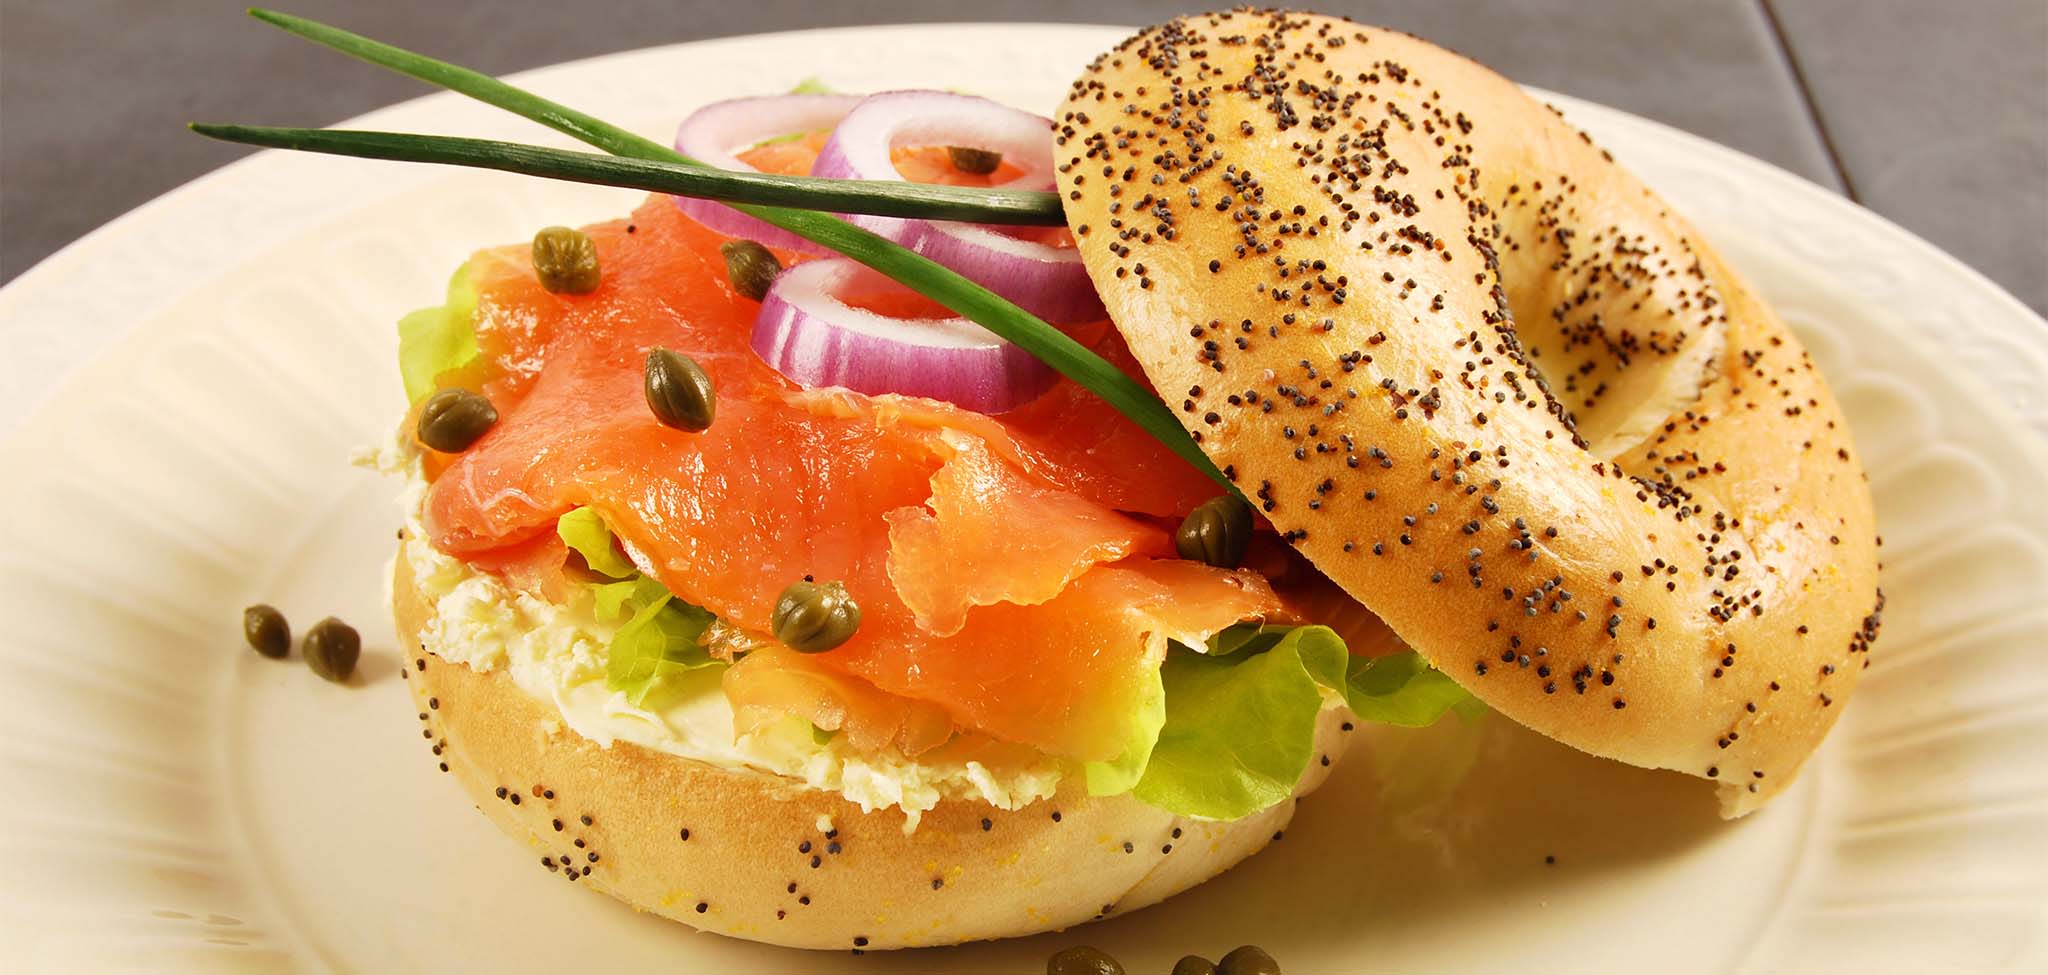 Bagel with salmon lox, a classic.